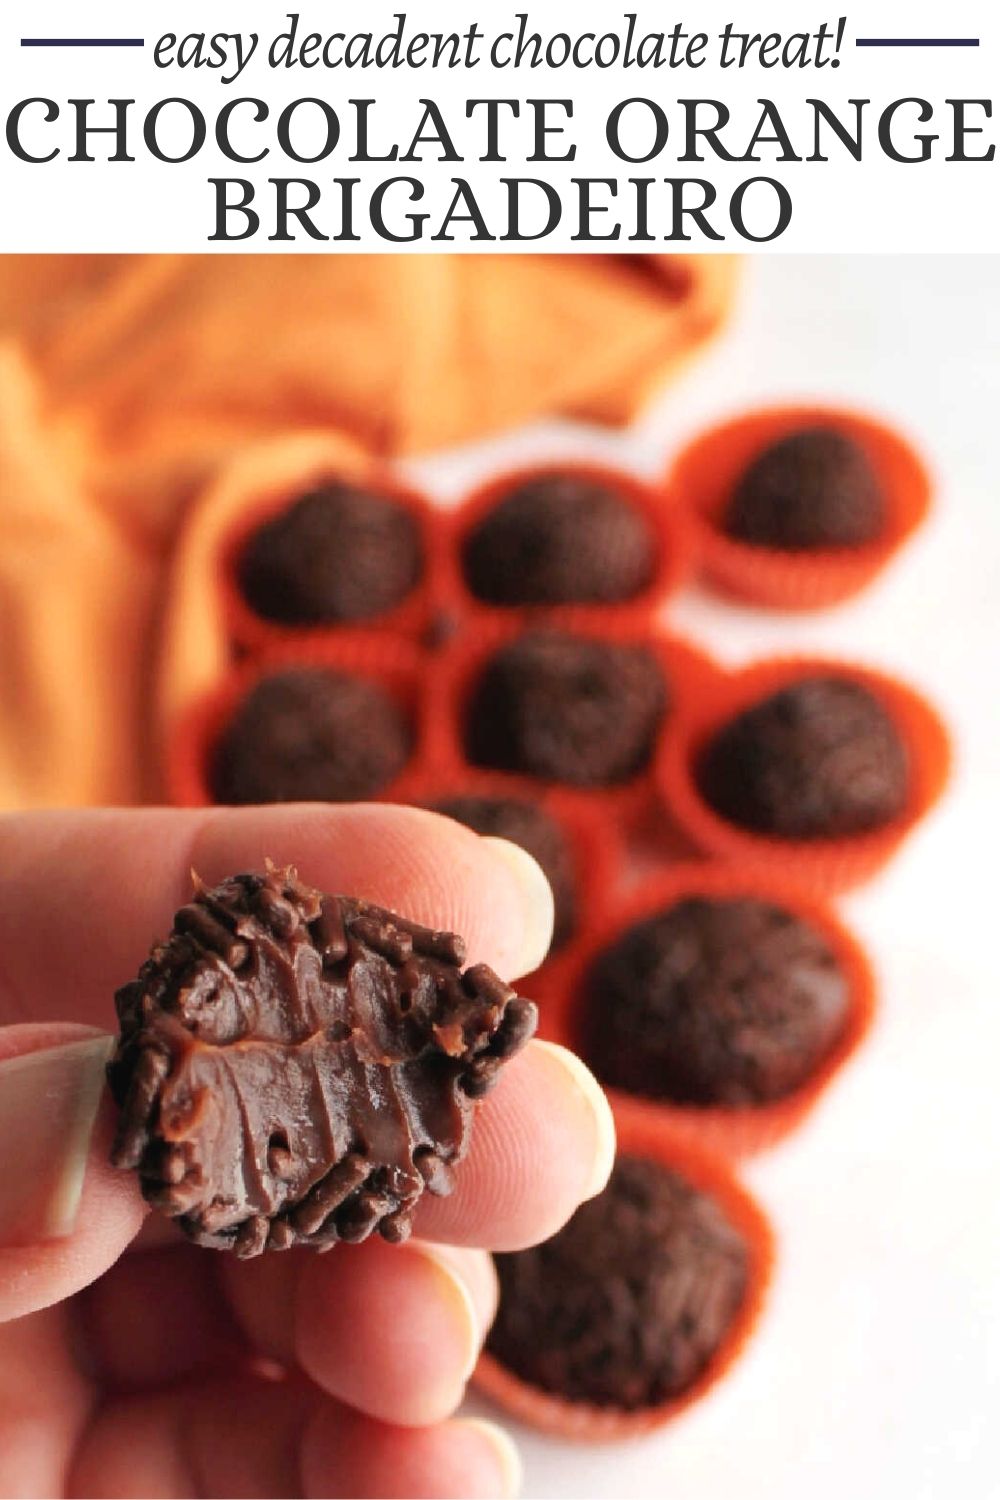 Brigadeiros are a delicious chocolate candy from Brazil.  They are easy to make and require just a few pantry staples as ingredients.  Add a hint of orange to make them an extra special treat!